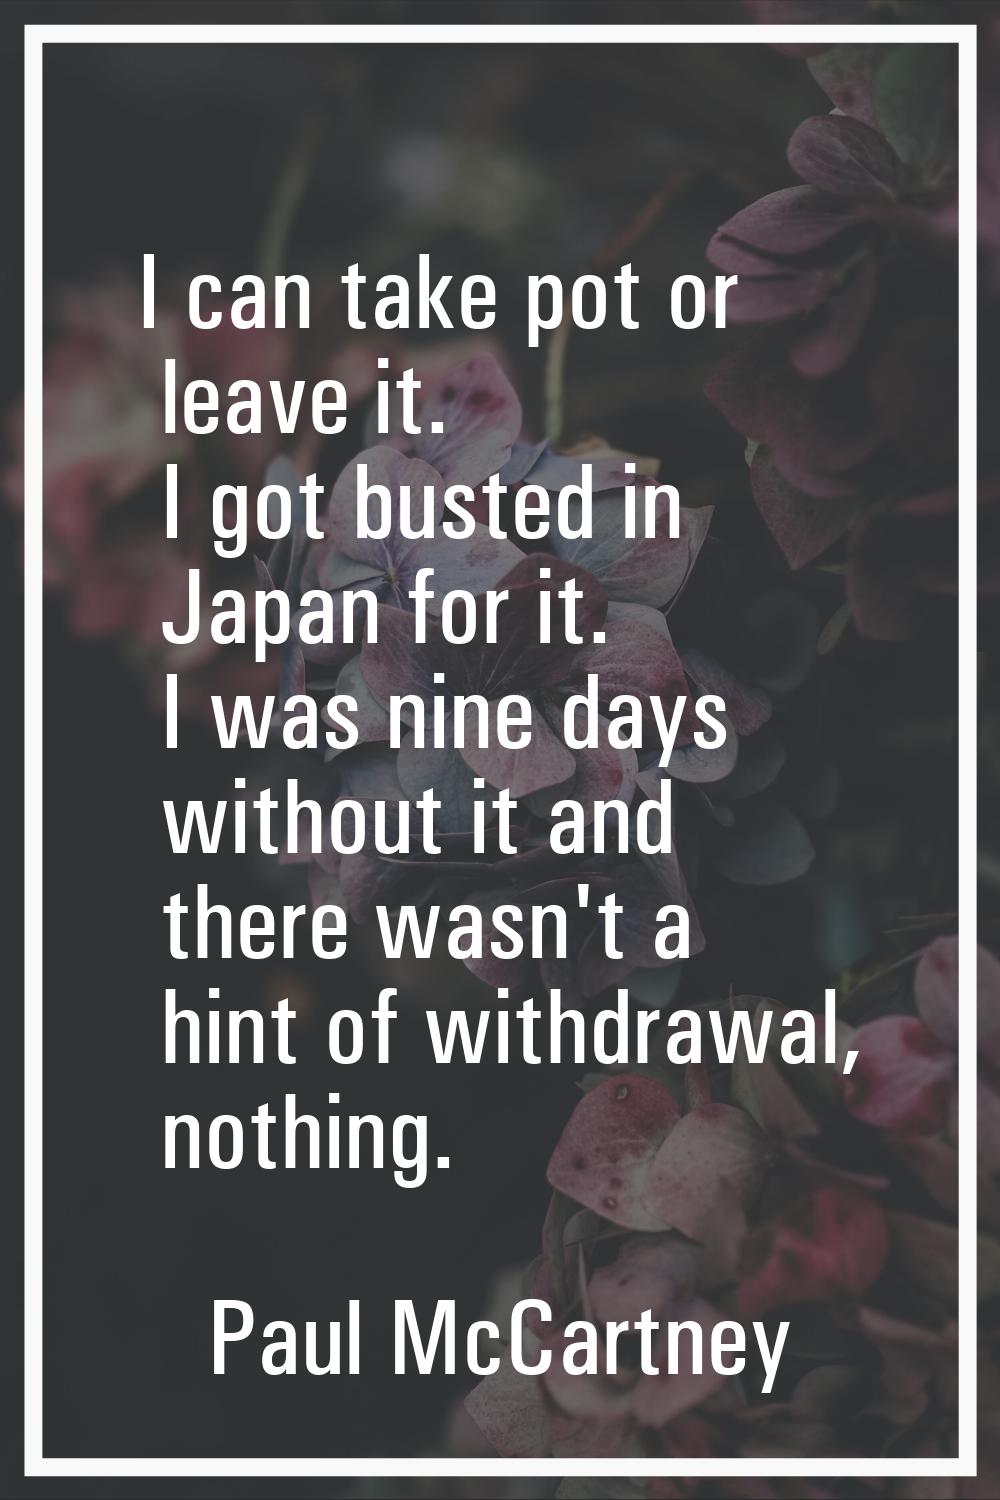 I can take pot or leave it. I got busted in Japan for it. I was nine days without it and there wasn